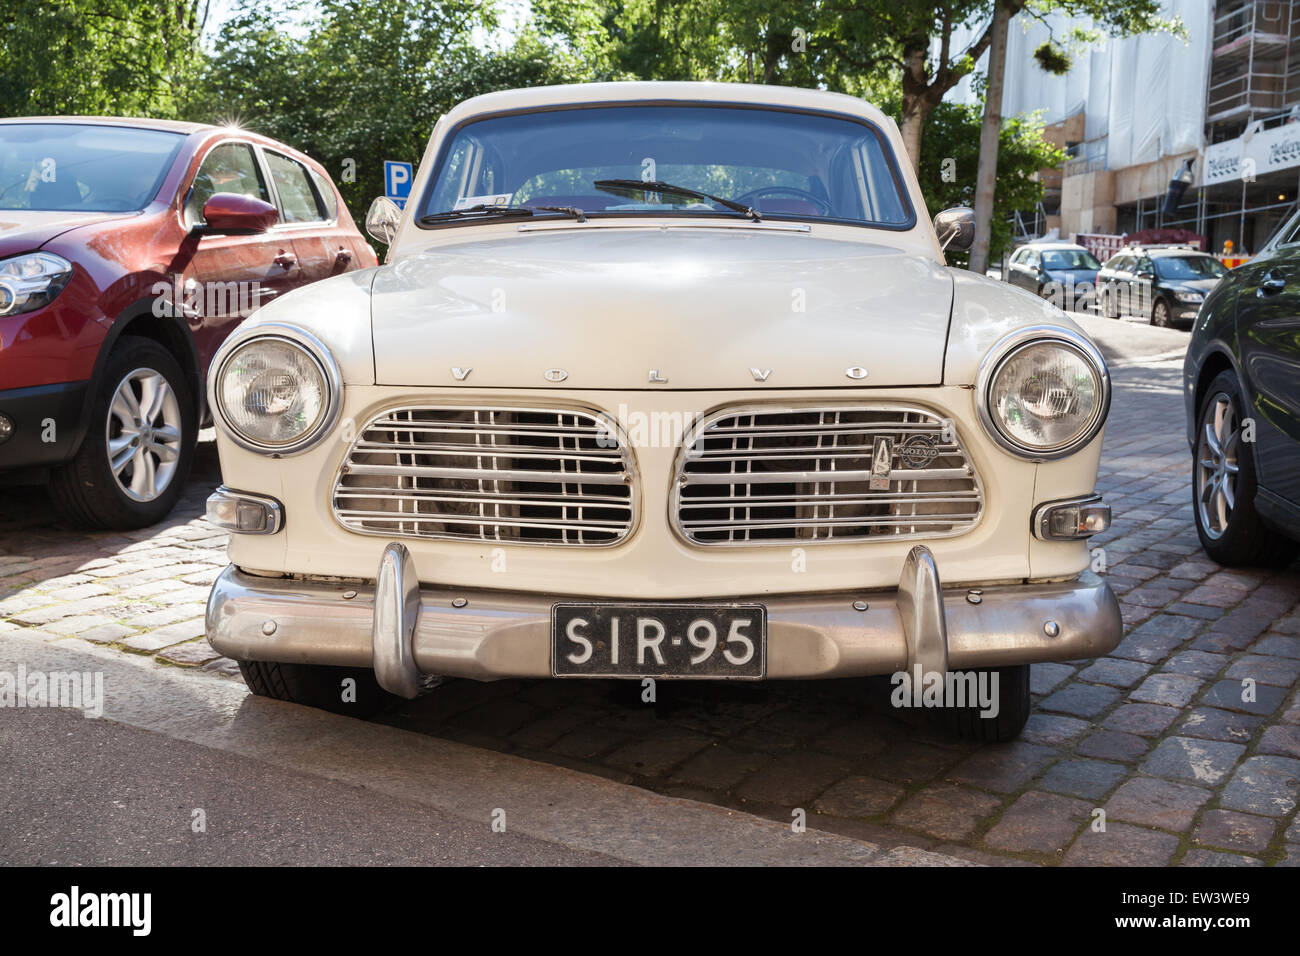 Helsinki, Finland - June 13, 2015: Old white Volvo Amazon 121 B12 car is parked on the roadside in Helsinki city. Front view Stock Photo